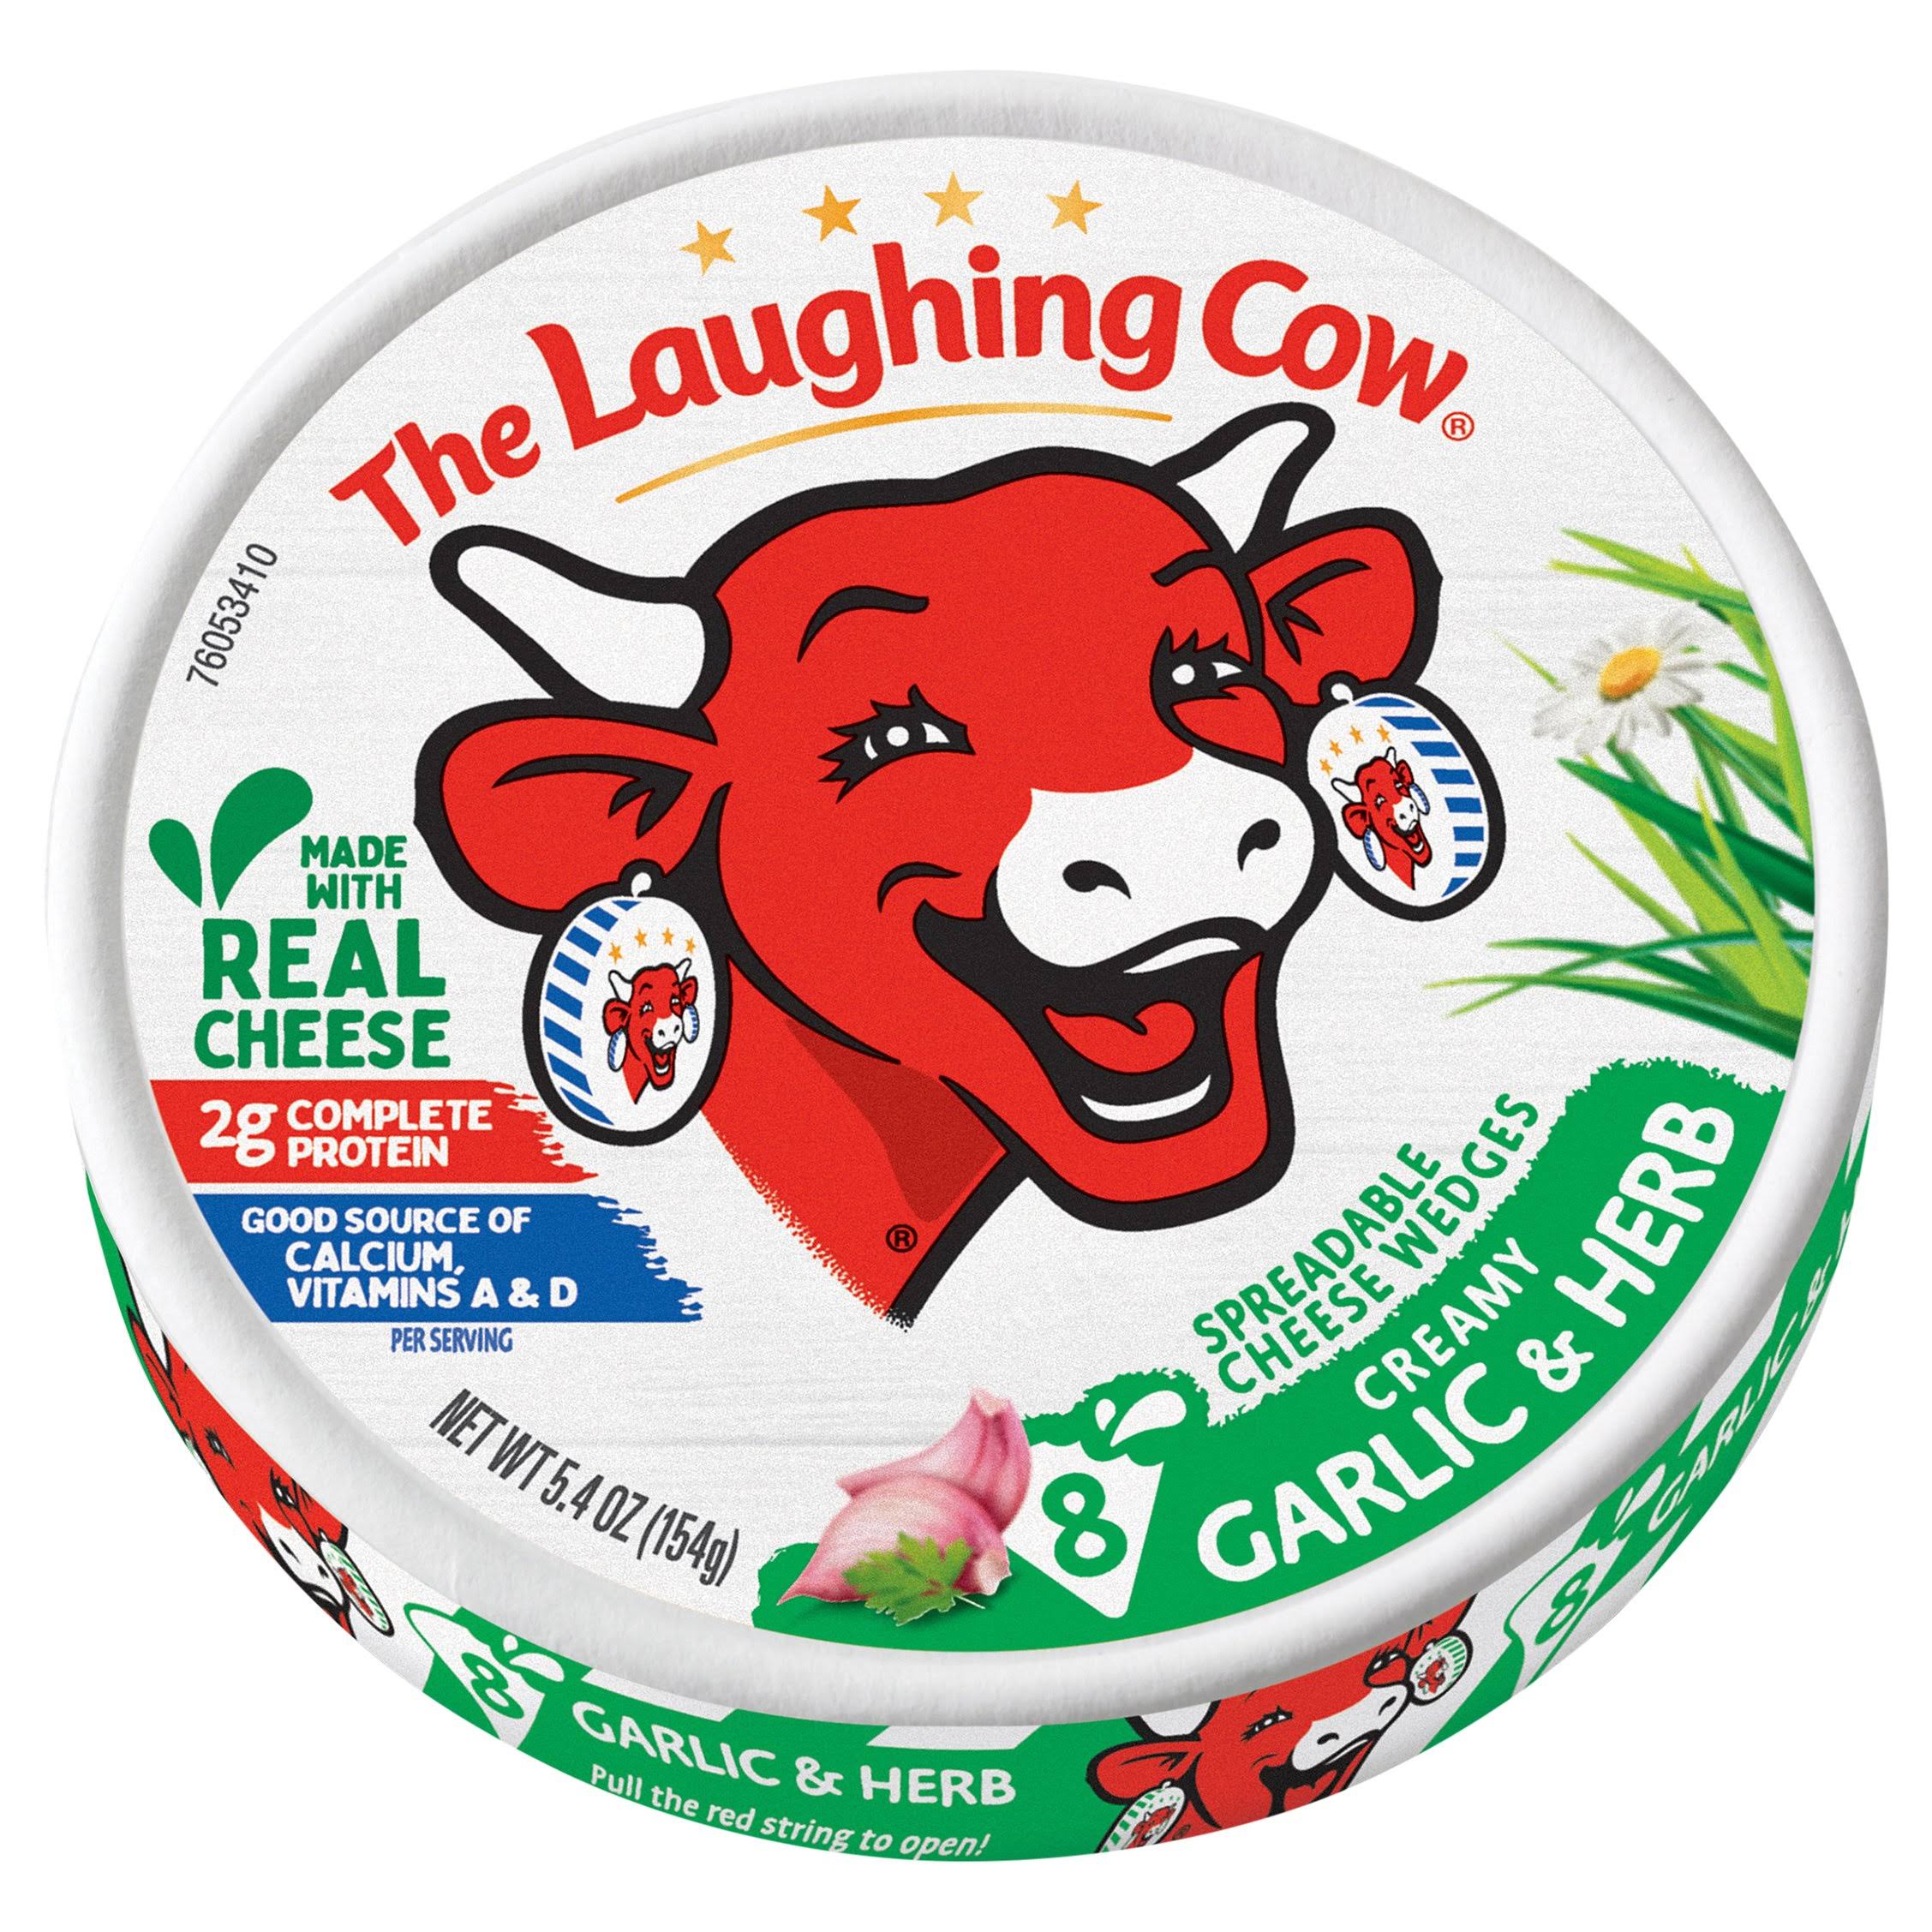 The Laughing Cow Creamy Garlic & Herb Spreadable Cheese Wedges 5.4 oz